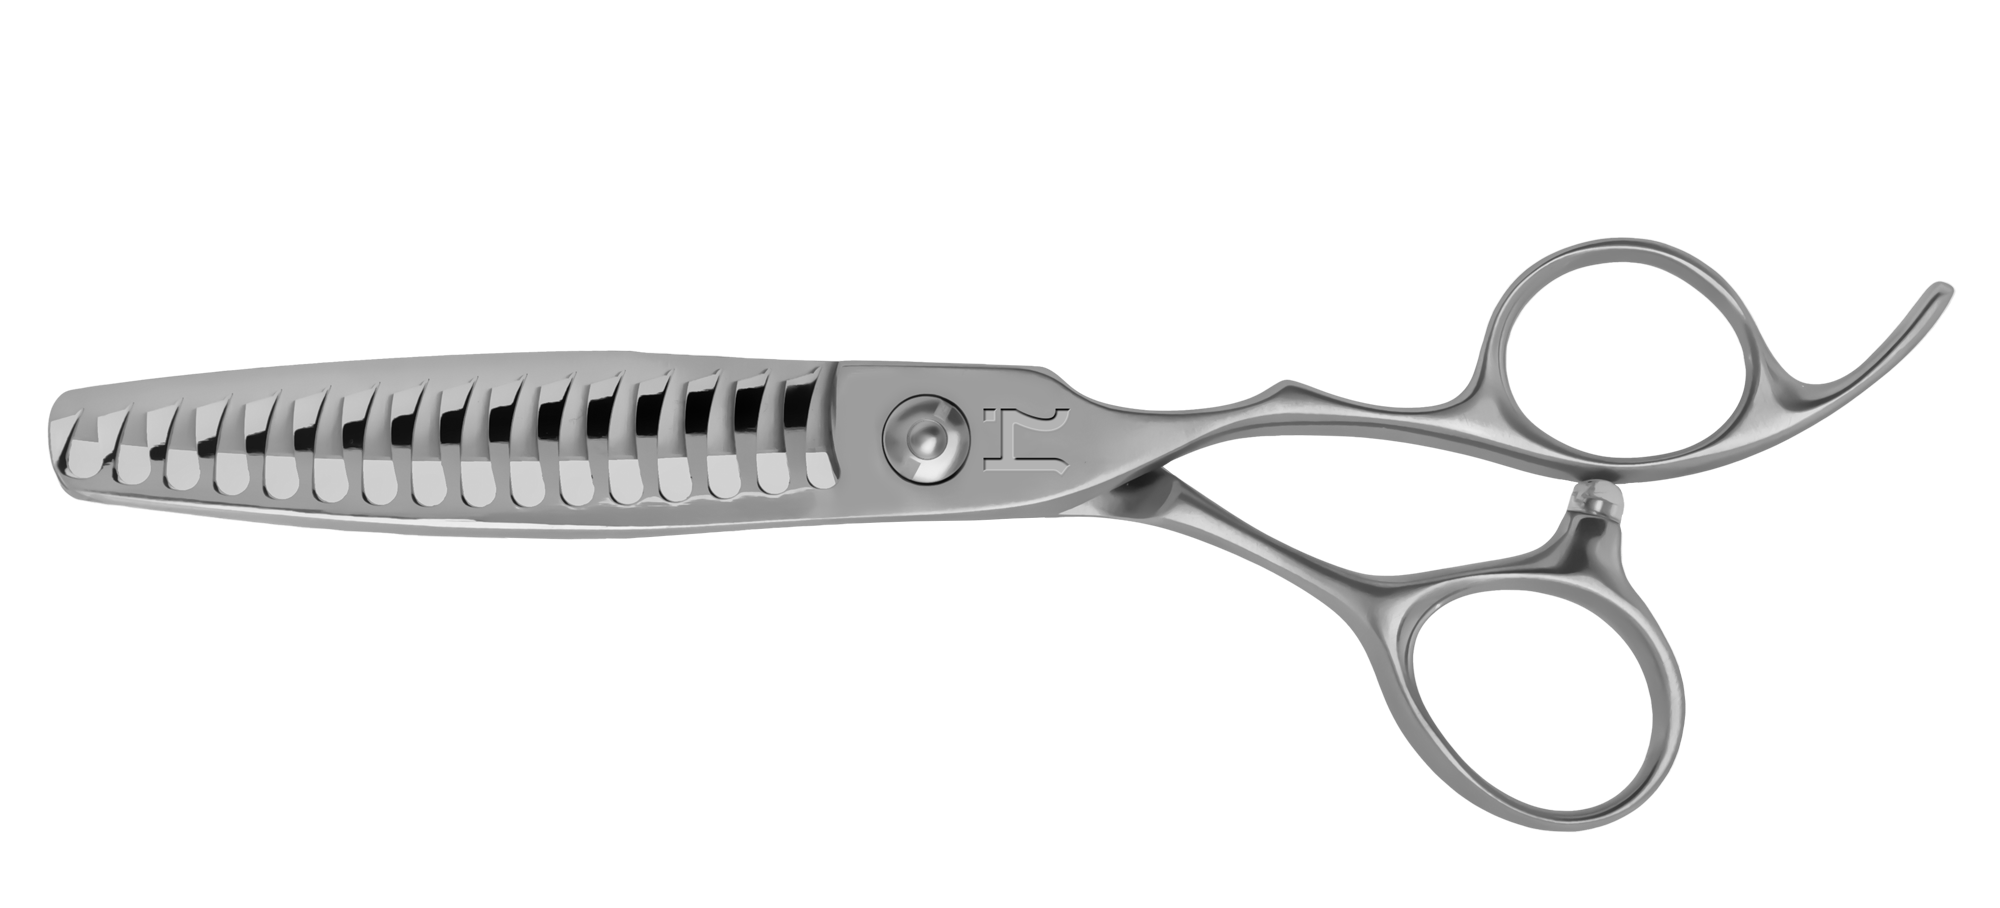 parts of shears